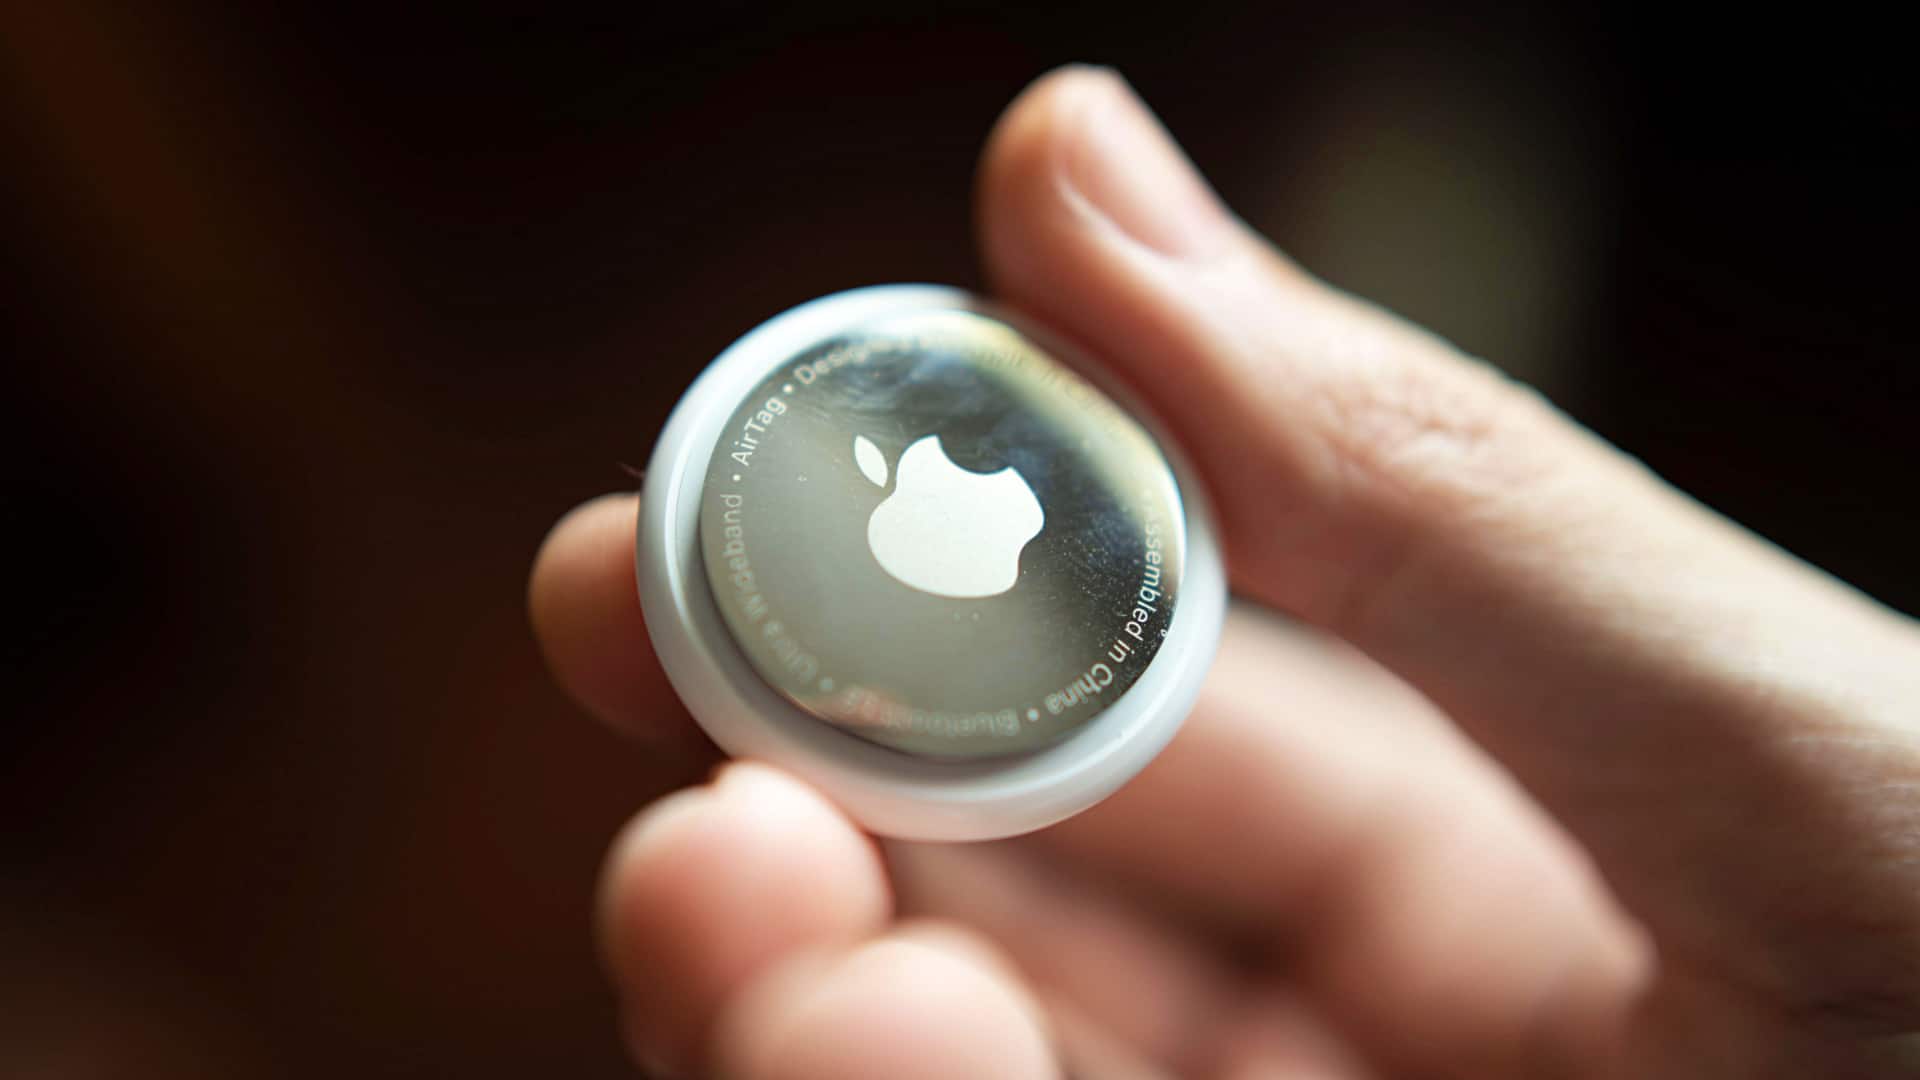 Apple loses bid to dismiss stalking allegations linked to AirTags